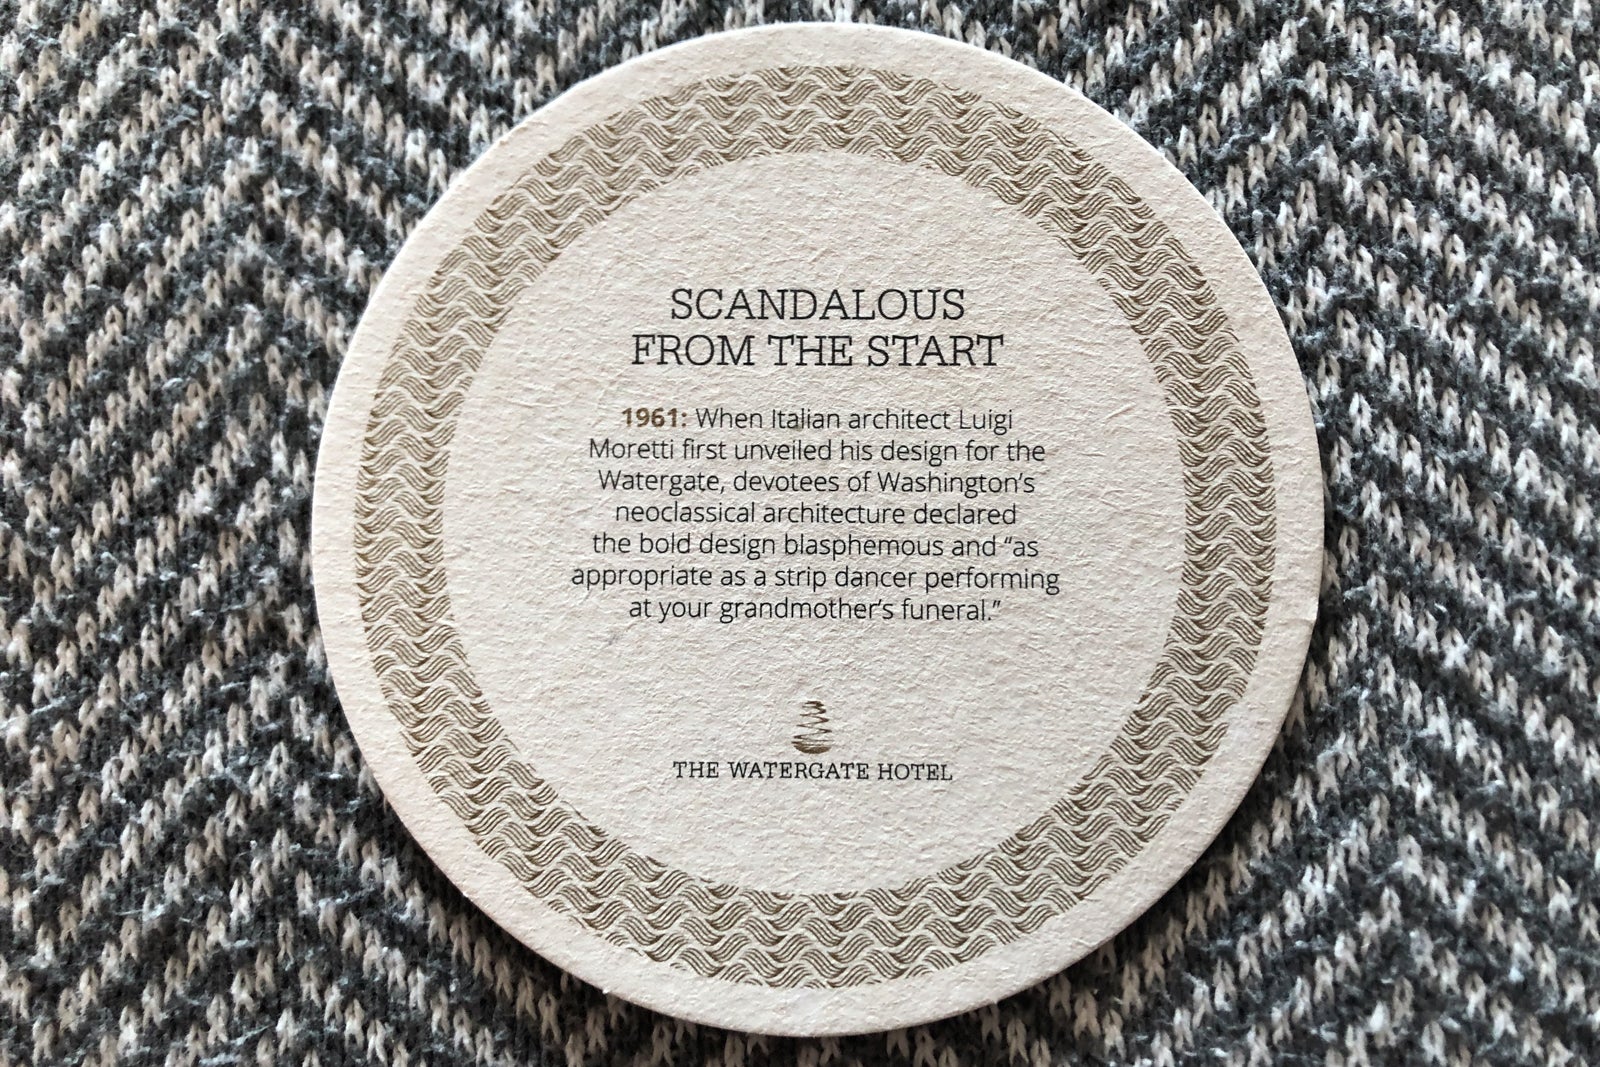 On a drink tray by the bed, several coasters featuring historical context about The Watergate Hotel's architecture can be found.